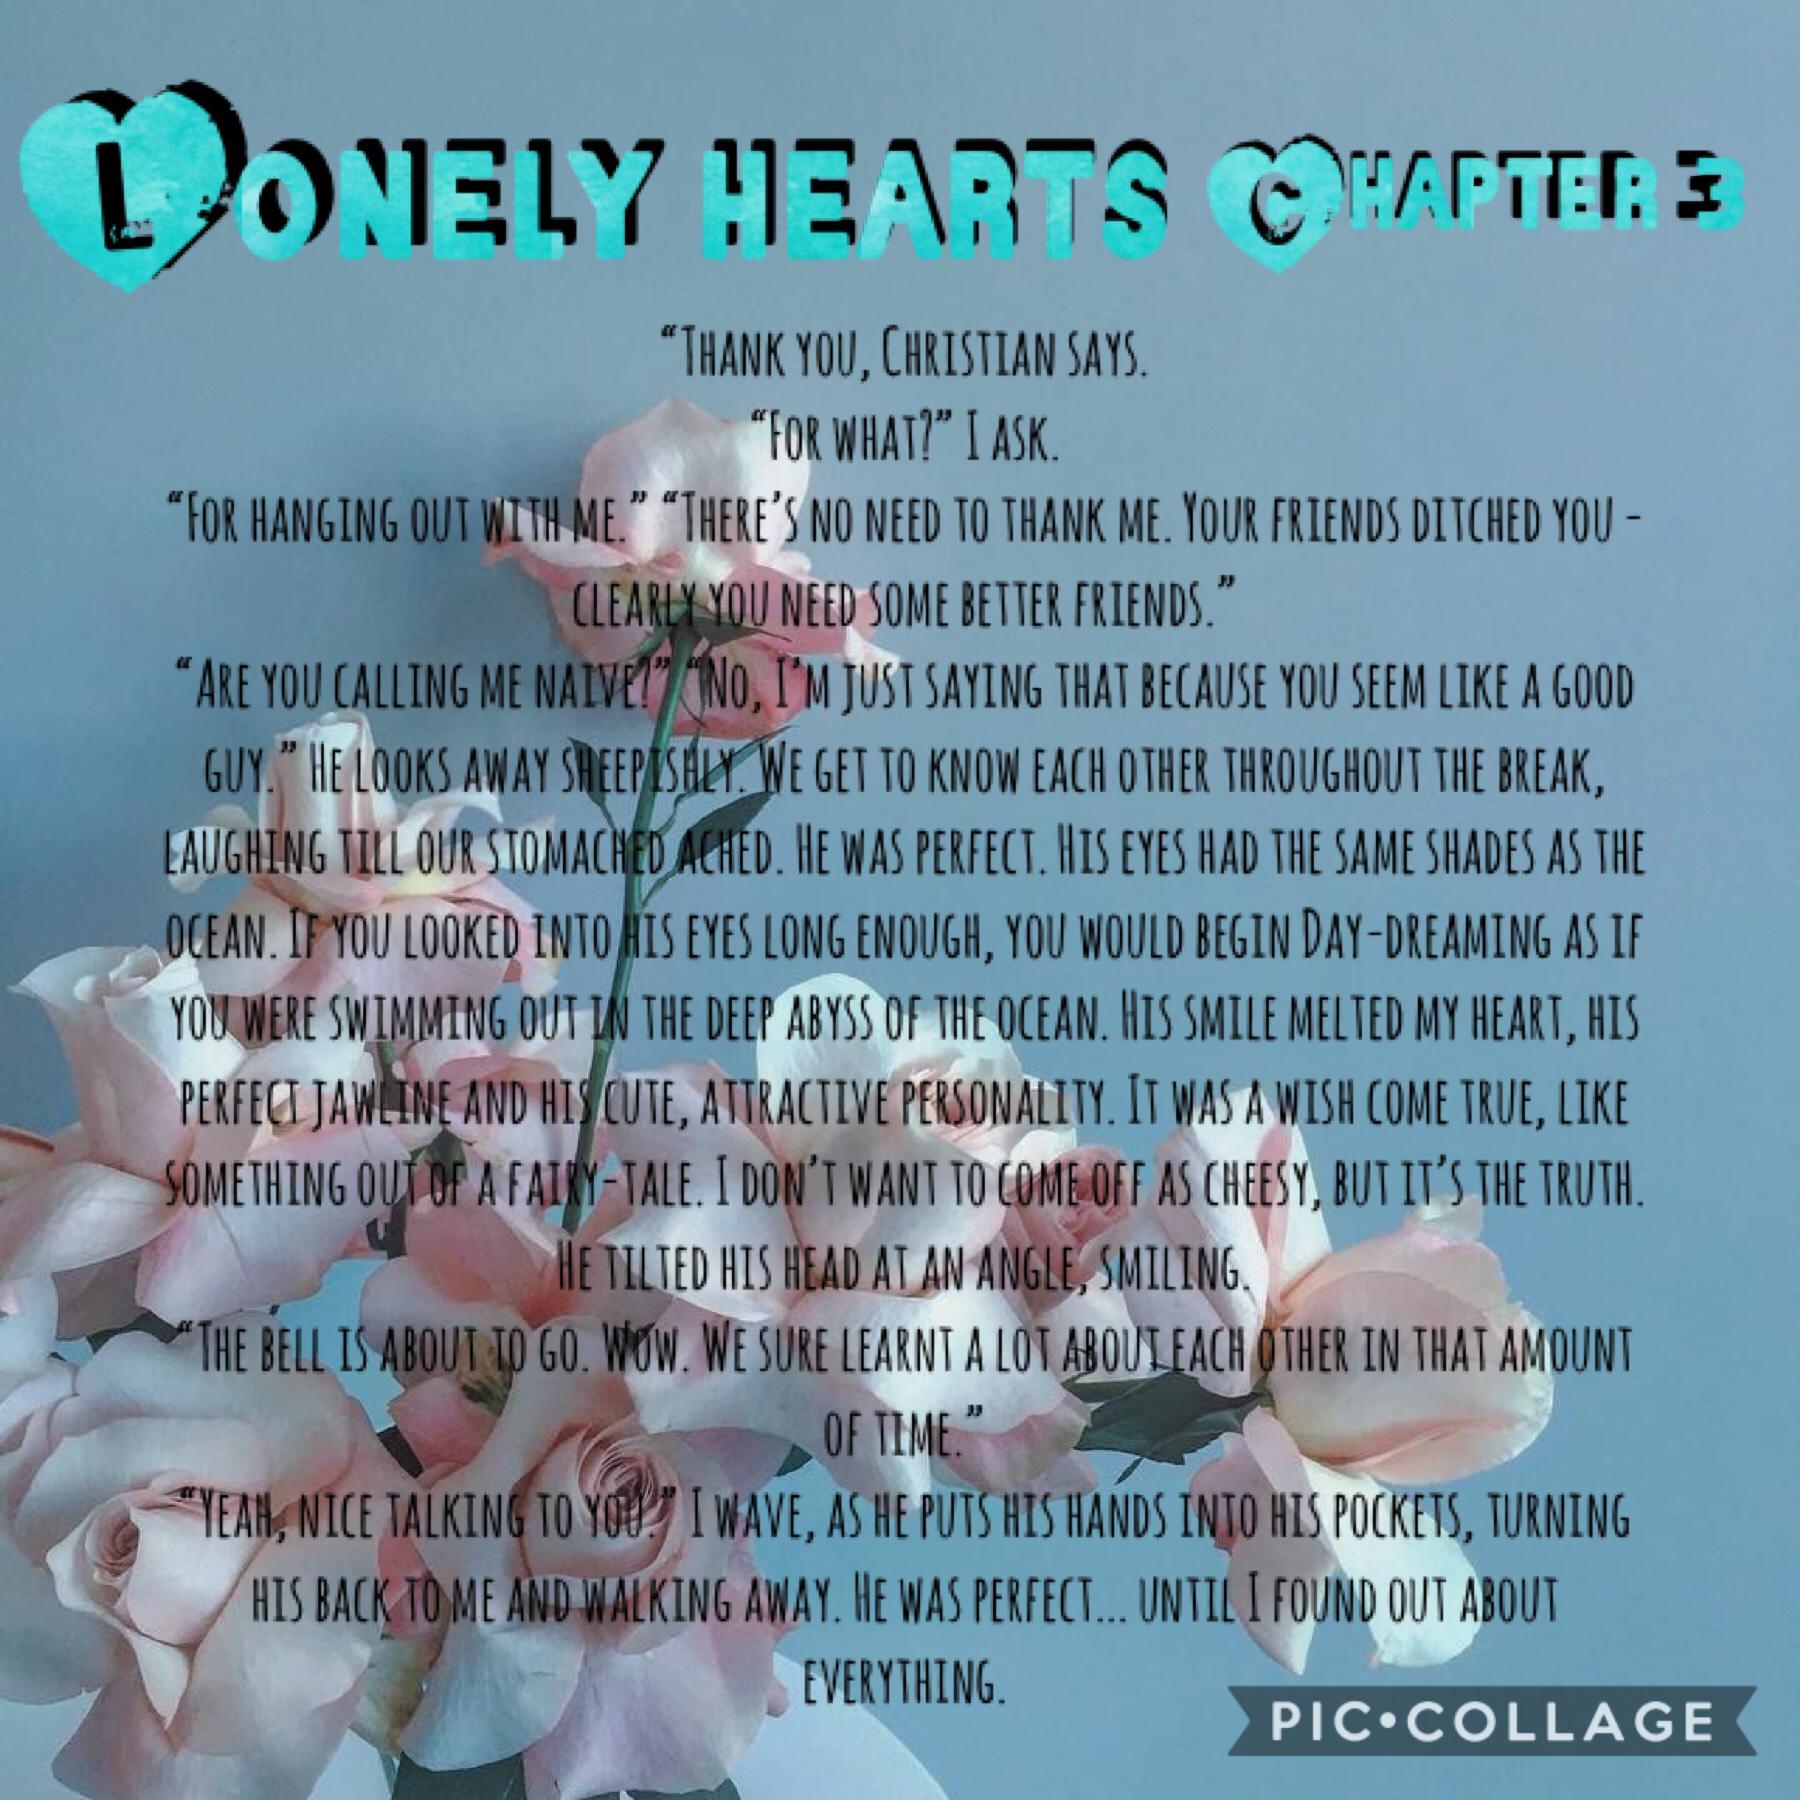 🥳TAP🥳

HAPPY NEW YEAR EVERYBODY!!

Third chapter of Lonely Hearts. See what happens next in my next chapter - soon to come! 